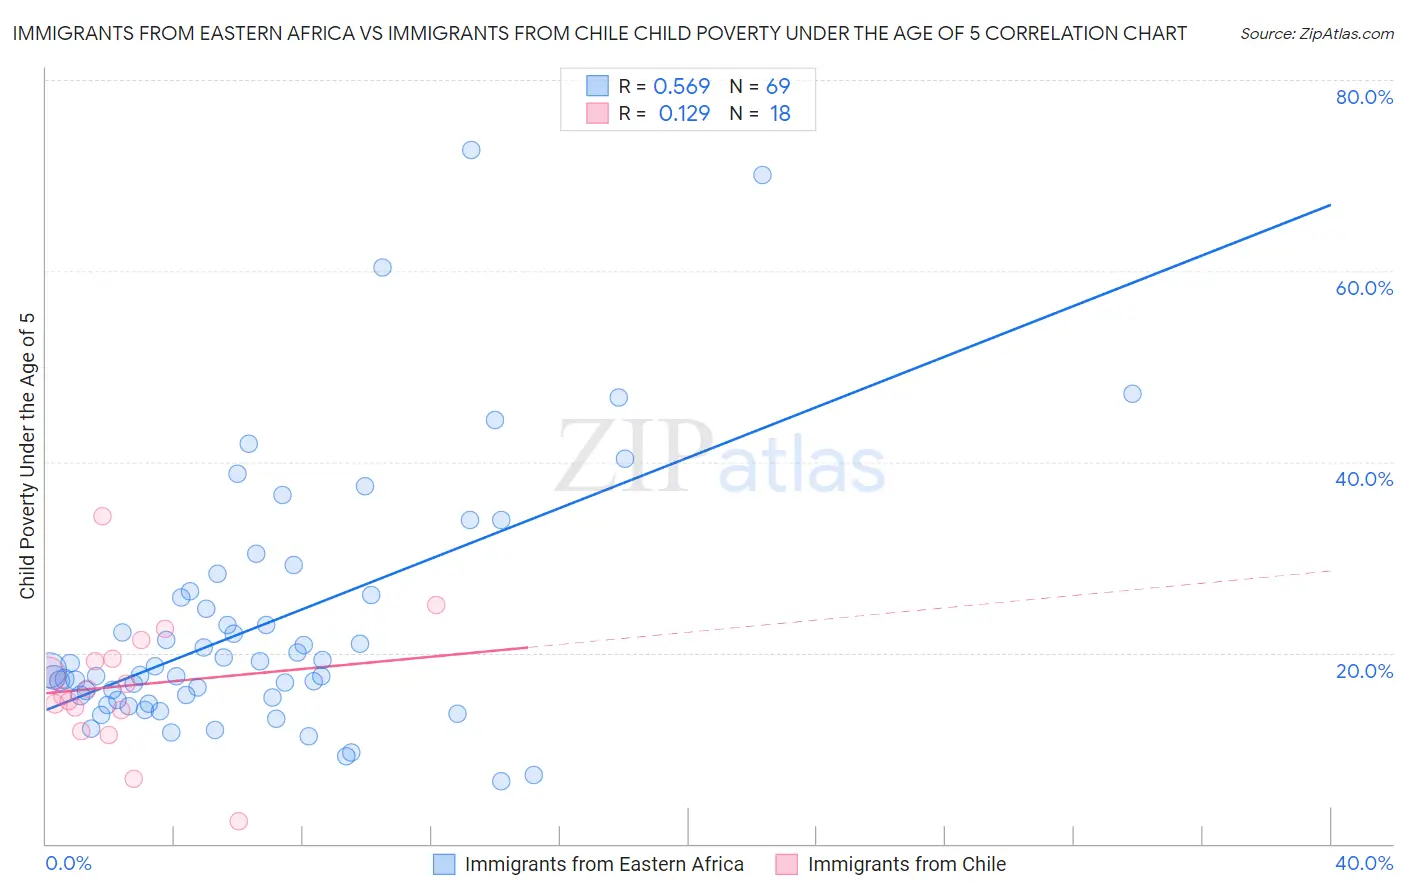 Immigrants from Eastern Africa vs Immigrants from Chile Child Poverty Under the Age of 5